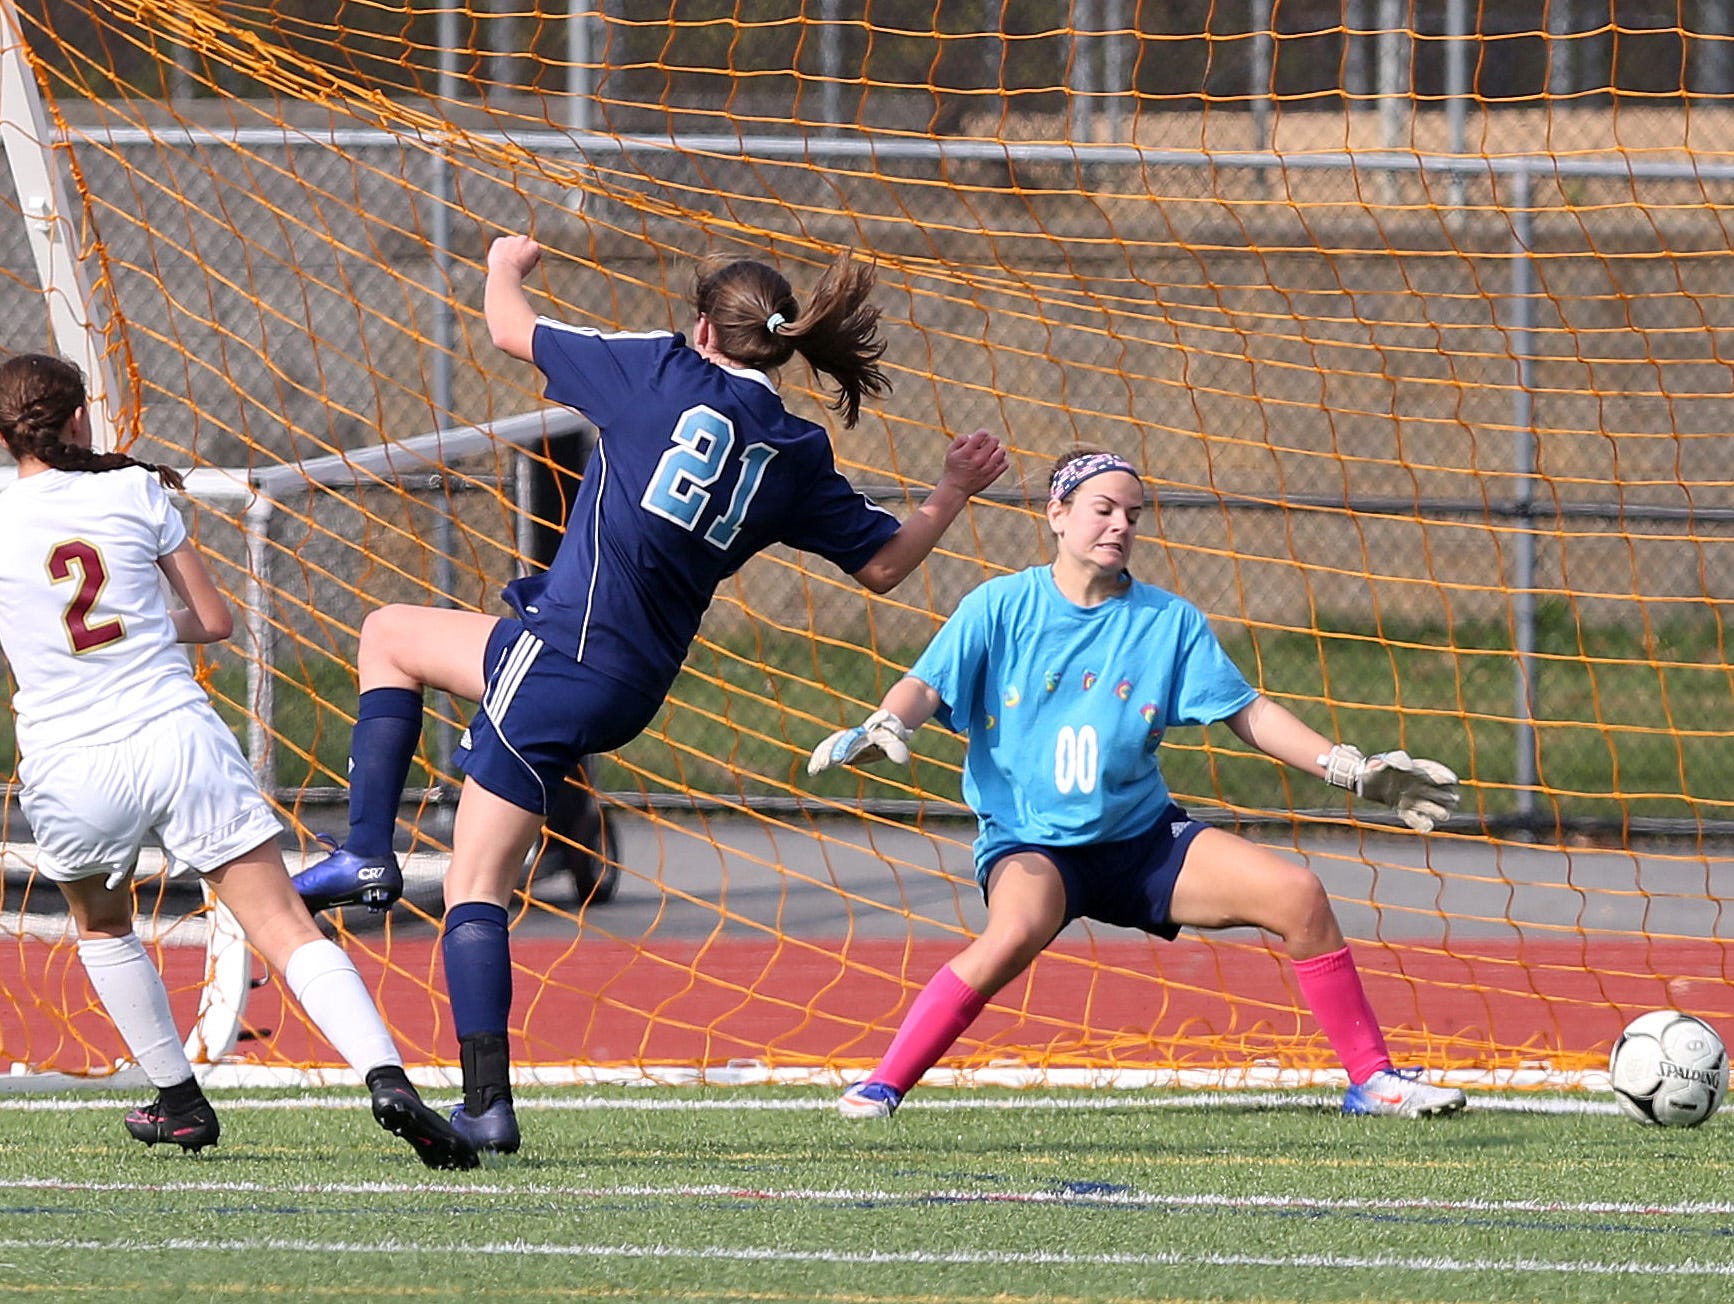 From left, Arlington's Meggie Buttinger (2) gets a shot by Suffern goal keeper Morgan Tamburro during the girls soccer Section 1 Class AA championship game at Yorktown High School Oct. 30, 2016. Arlington won the game 2-0.